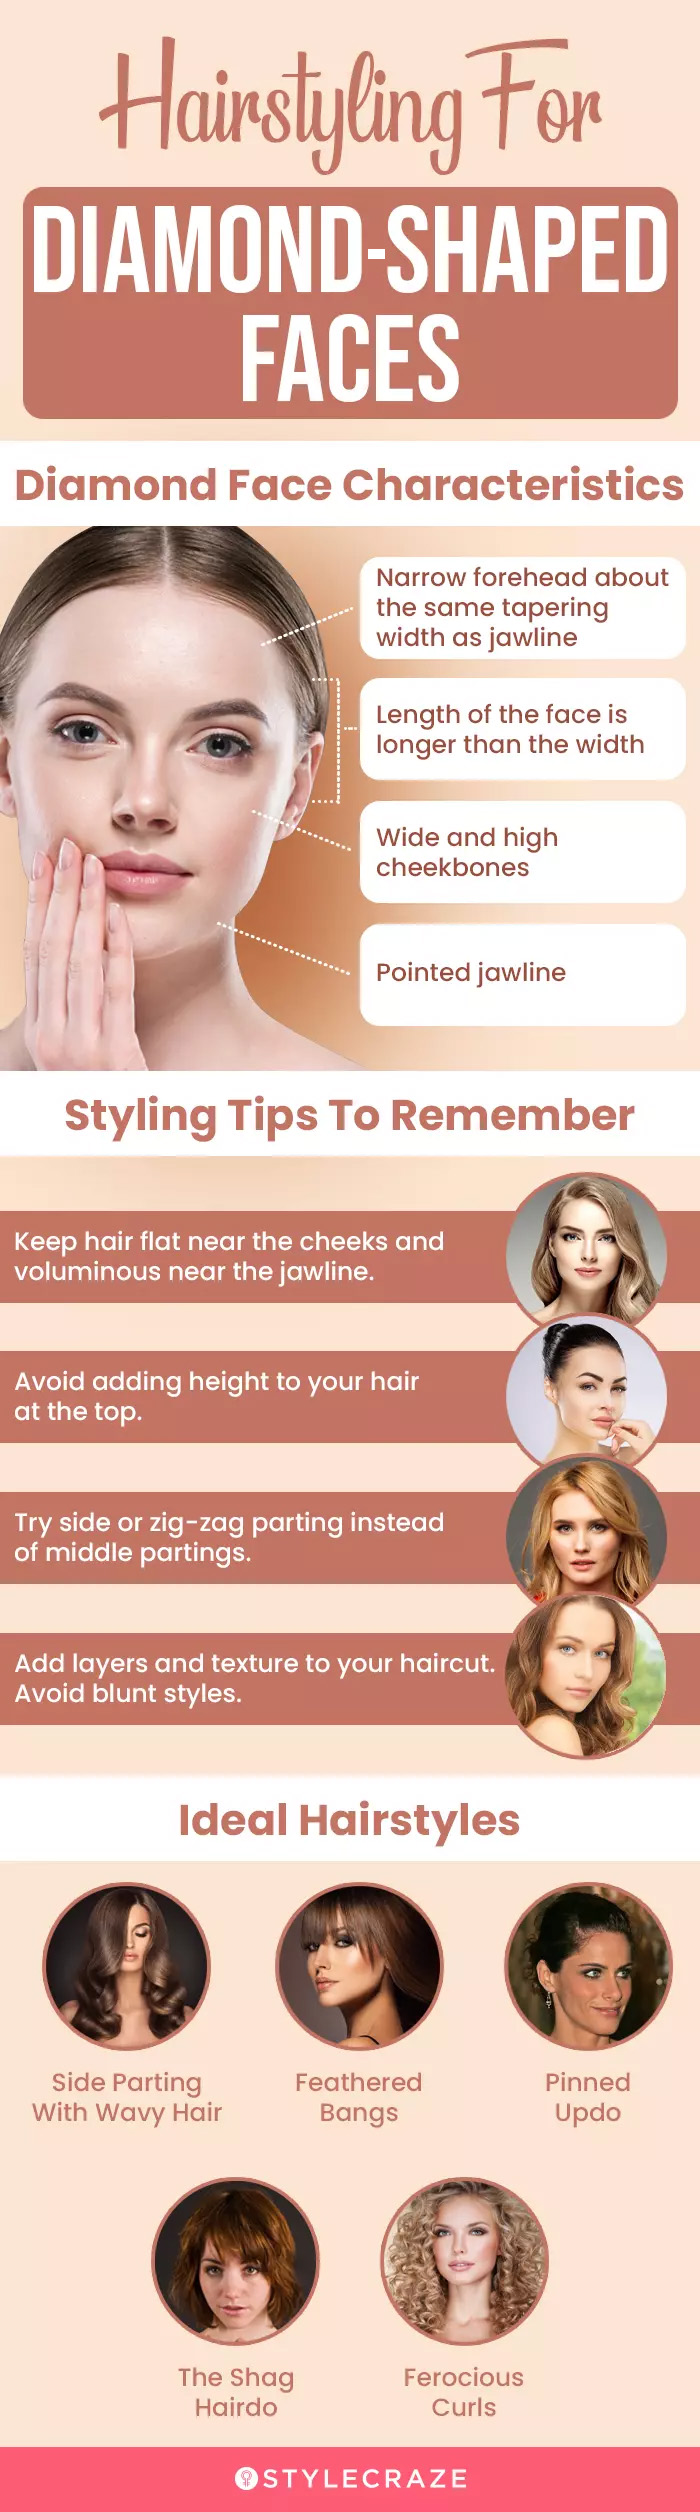 hairstyling for diamond shaped faces (infographic)